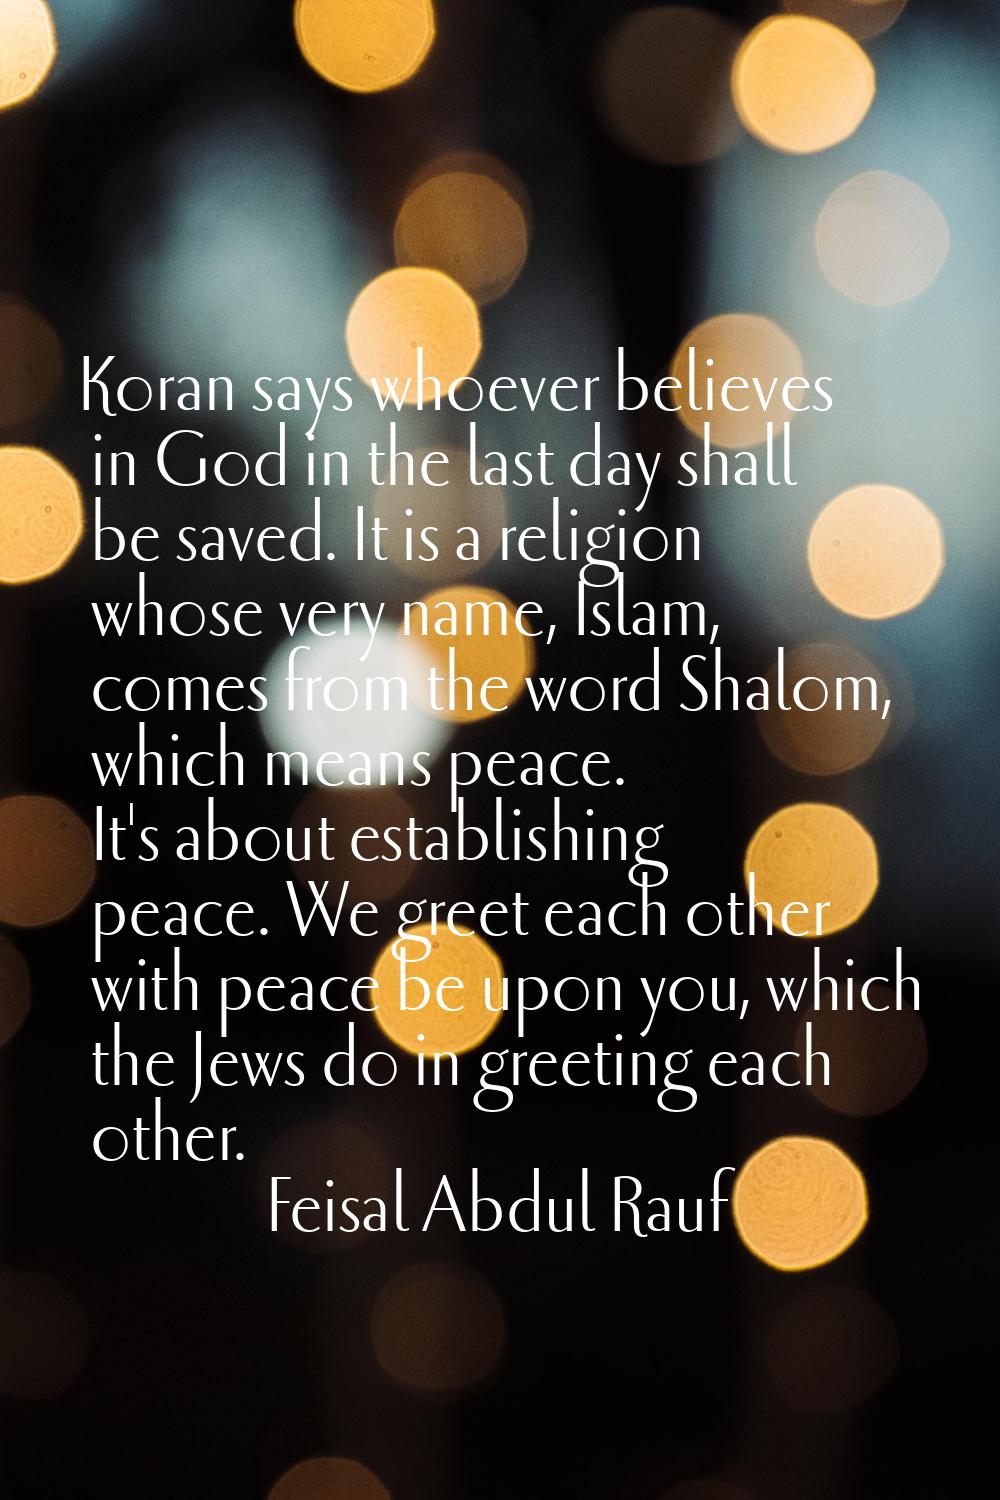 Koran says whoever believes in God in the last day shall be saved. It is a religion whose very name